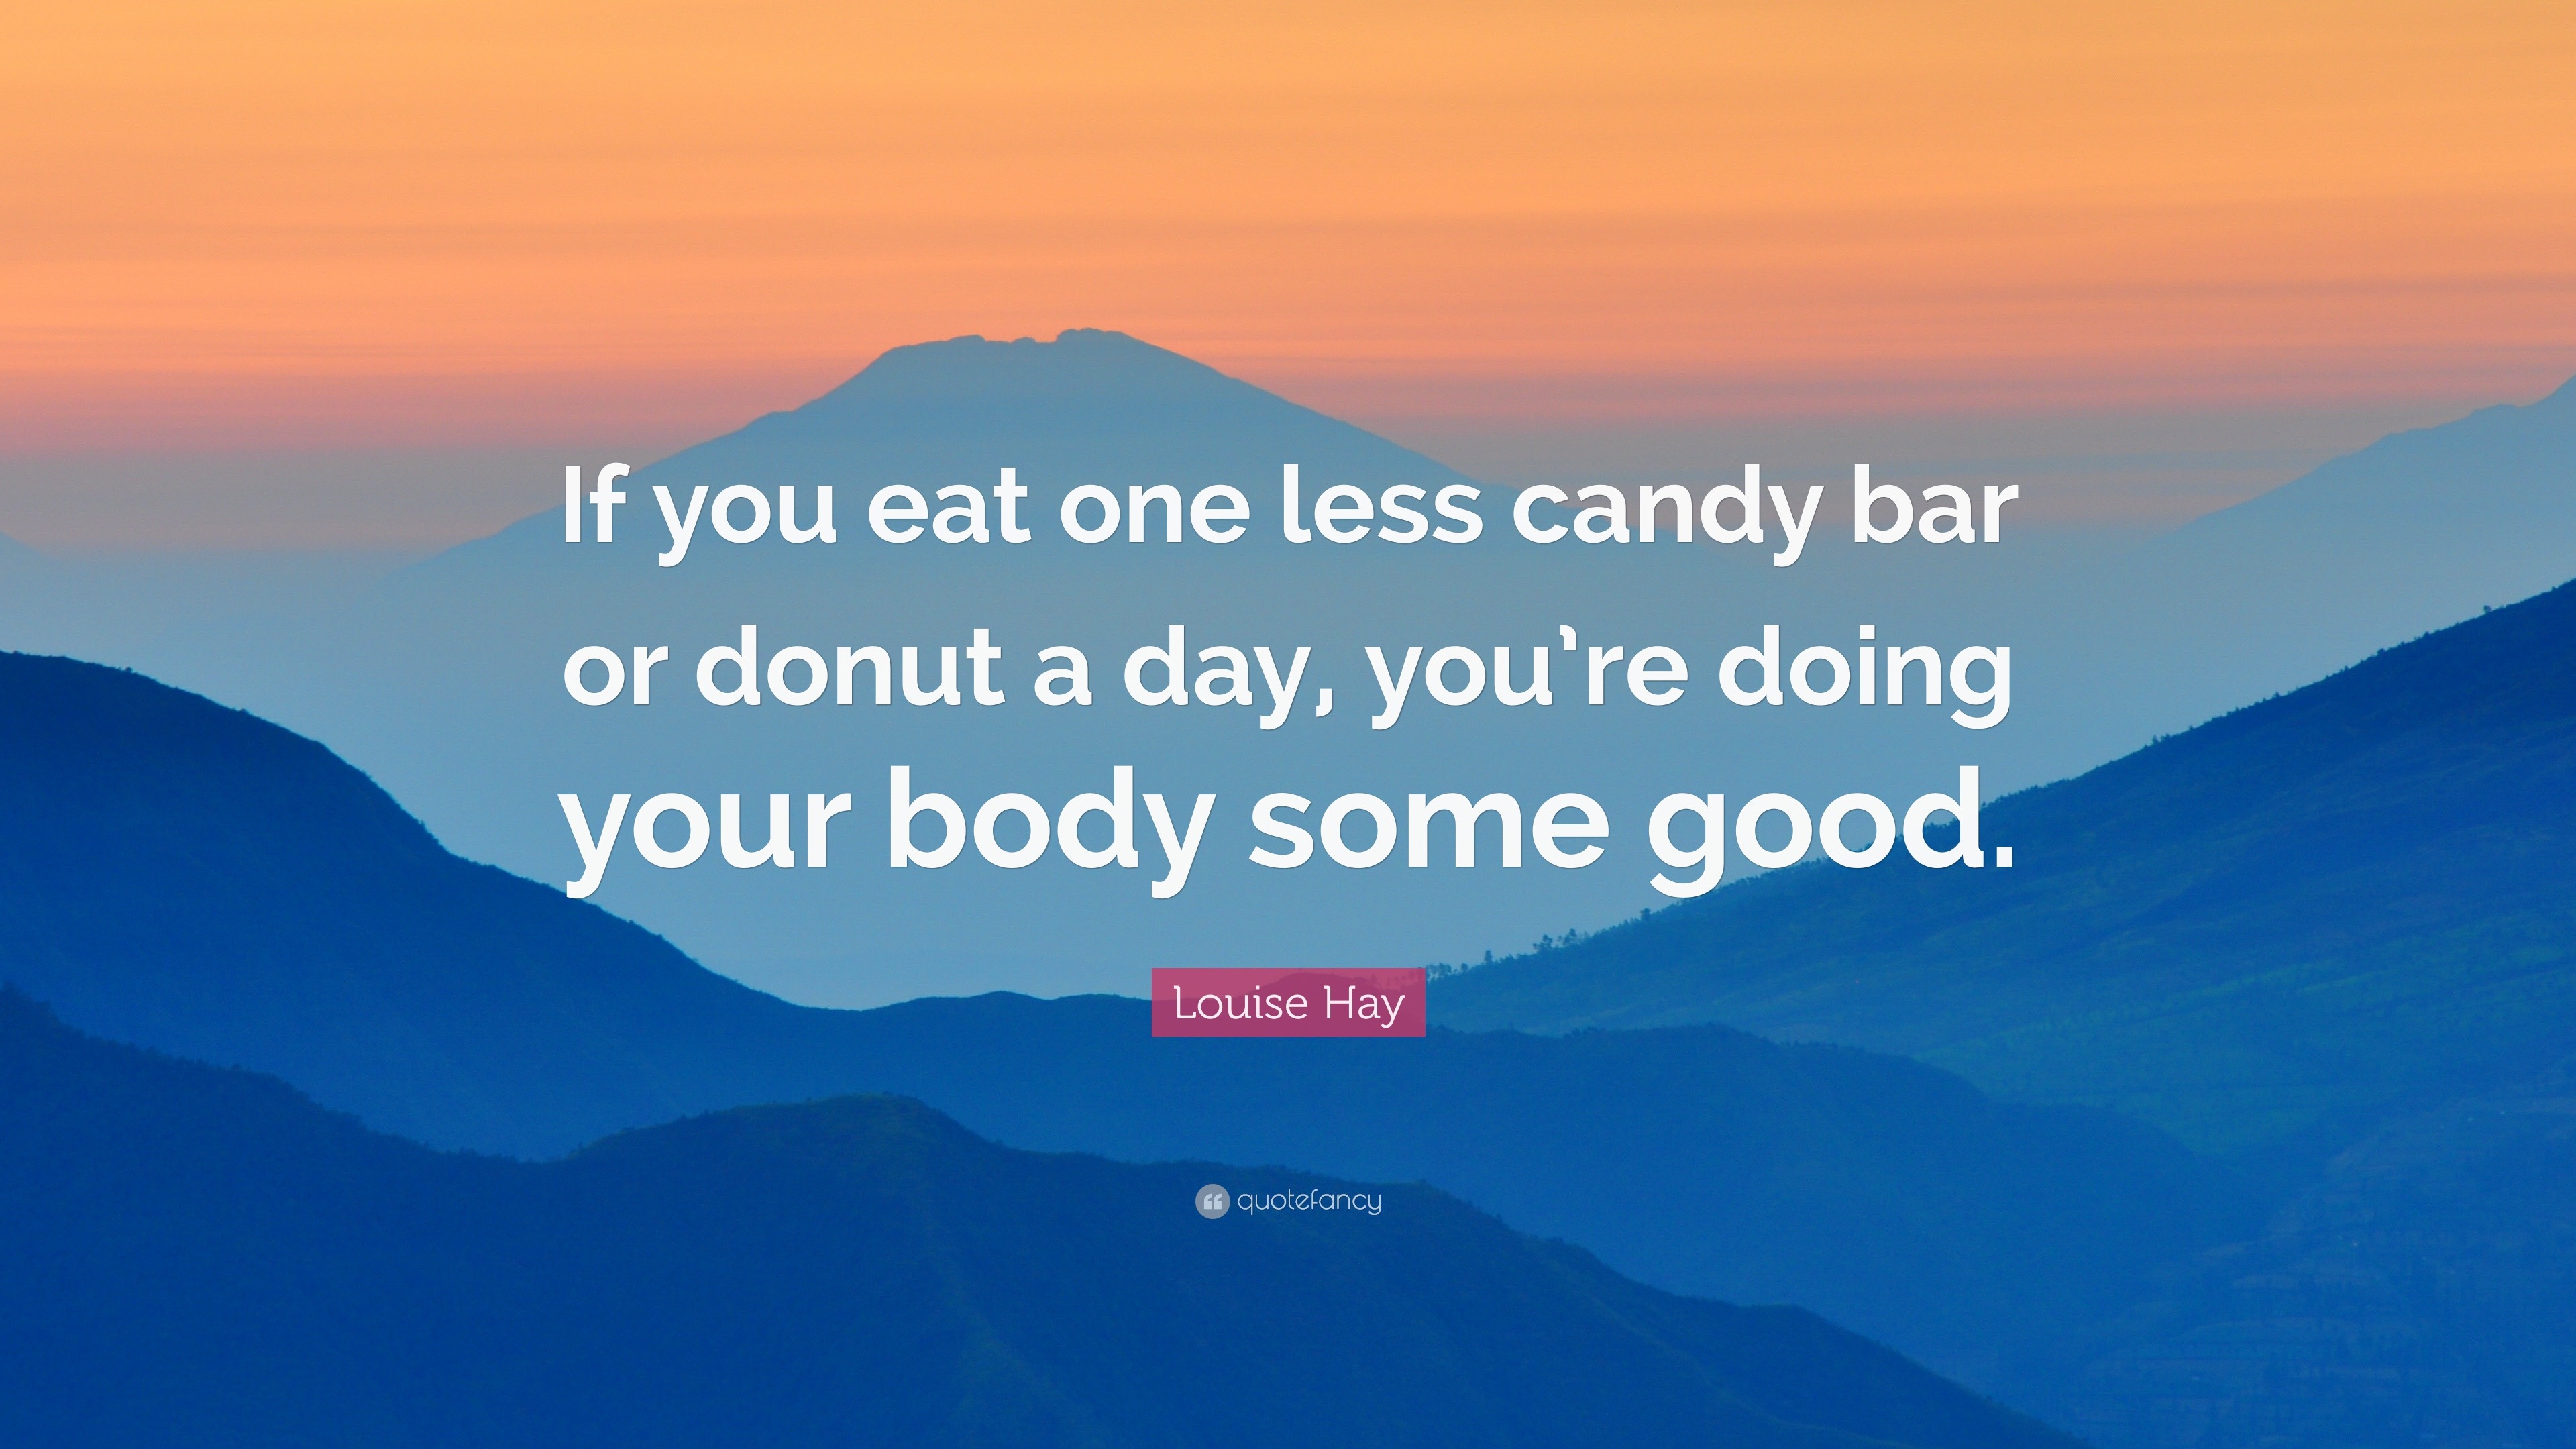 Louise Hay Quote: “If you eat one less candy bar or donut a day, you’re ...